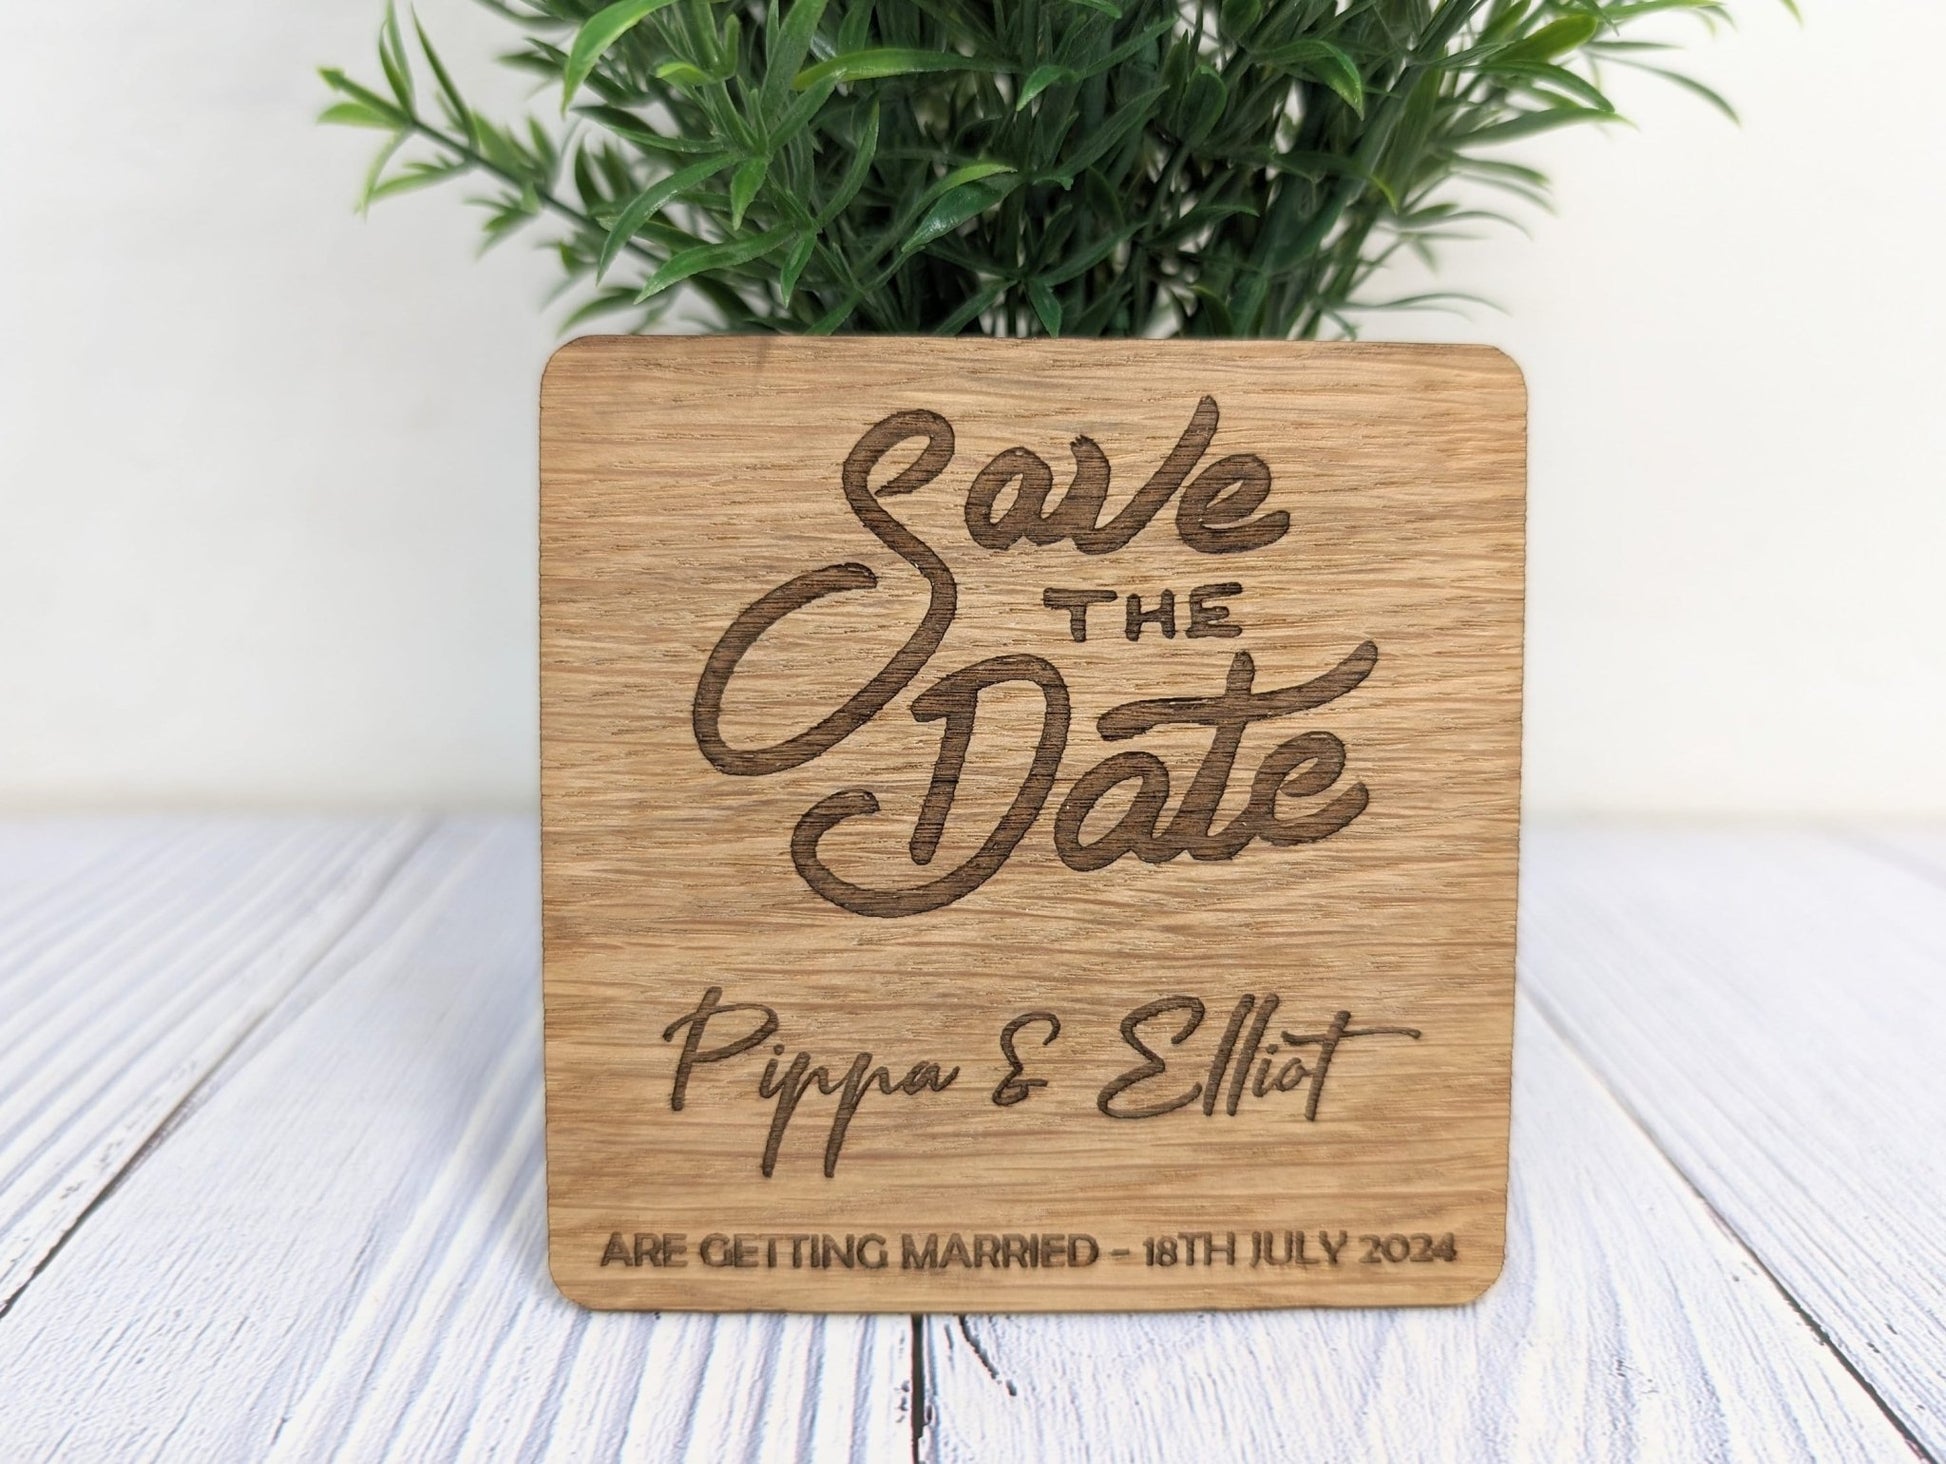 Personalised 'Save The Date' Wooden Coasters - Unique Wedding Favors - CherryGroveCraft